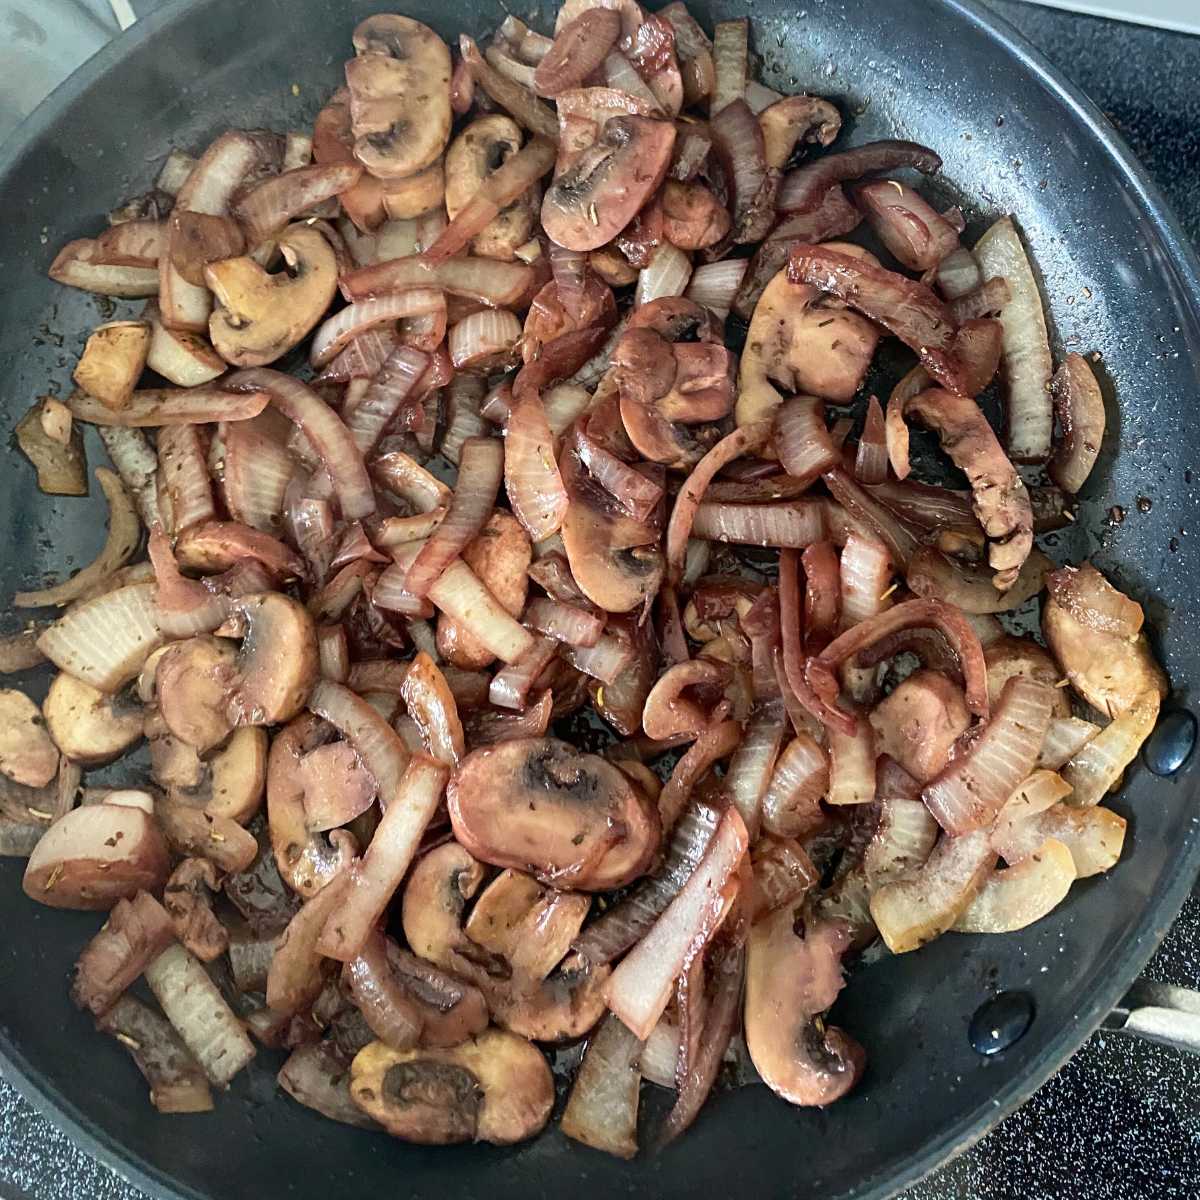 Mushrooms and onions after red wine was added and has mostly evaporated.